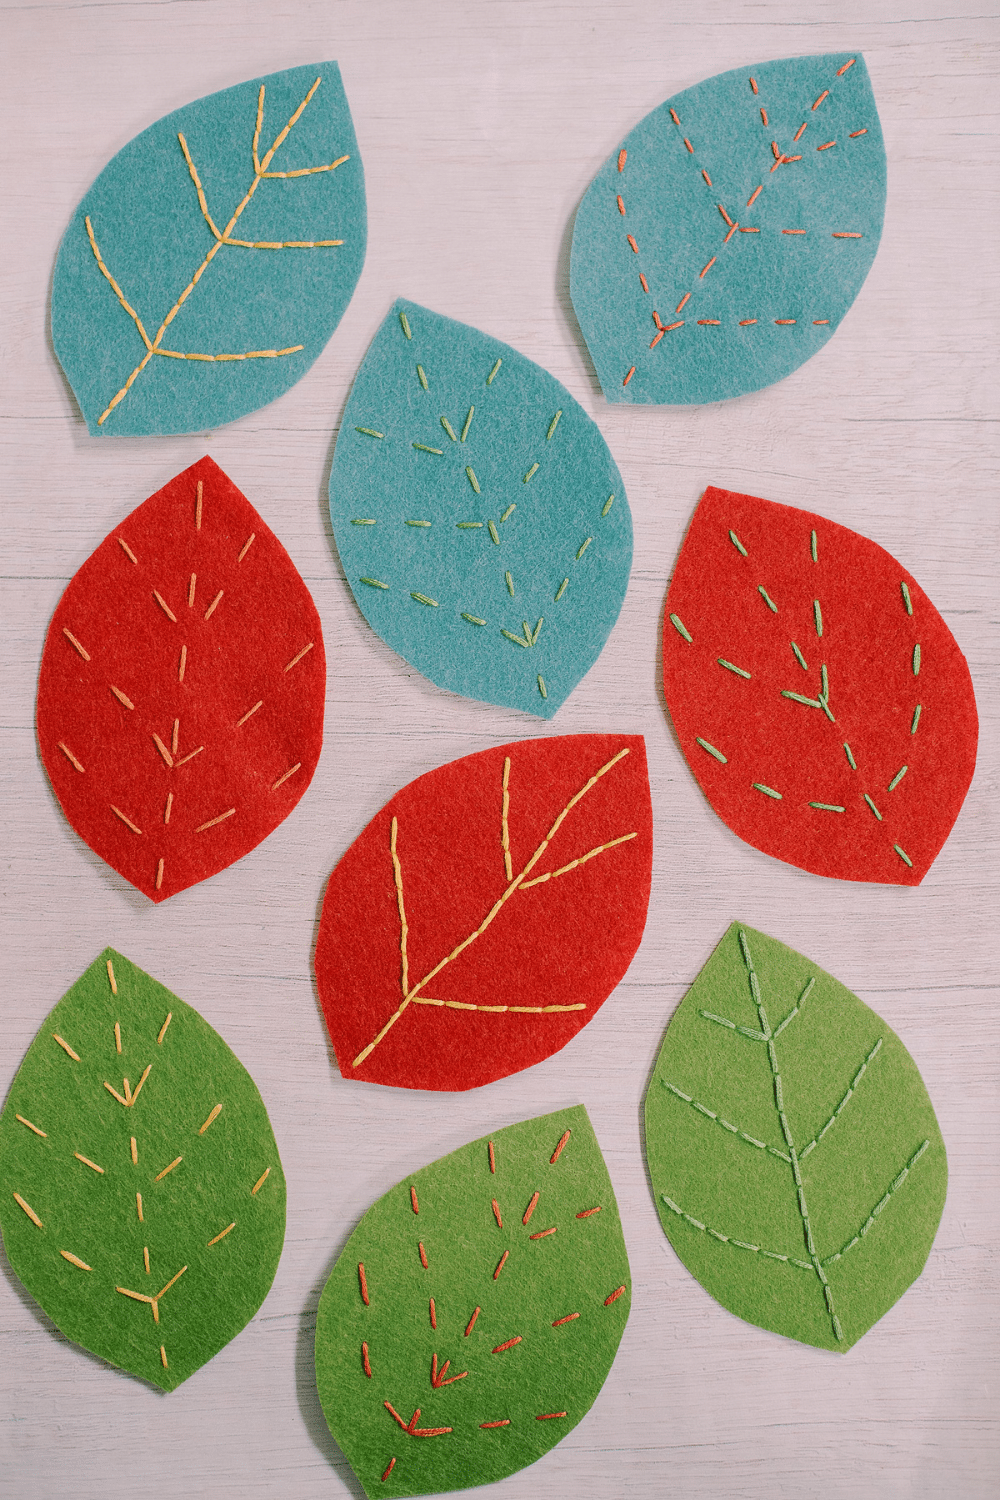 How to Make Embroidered Felt Leaves